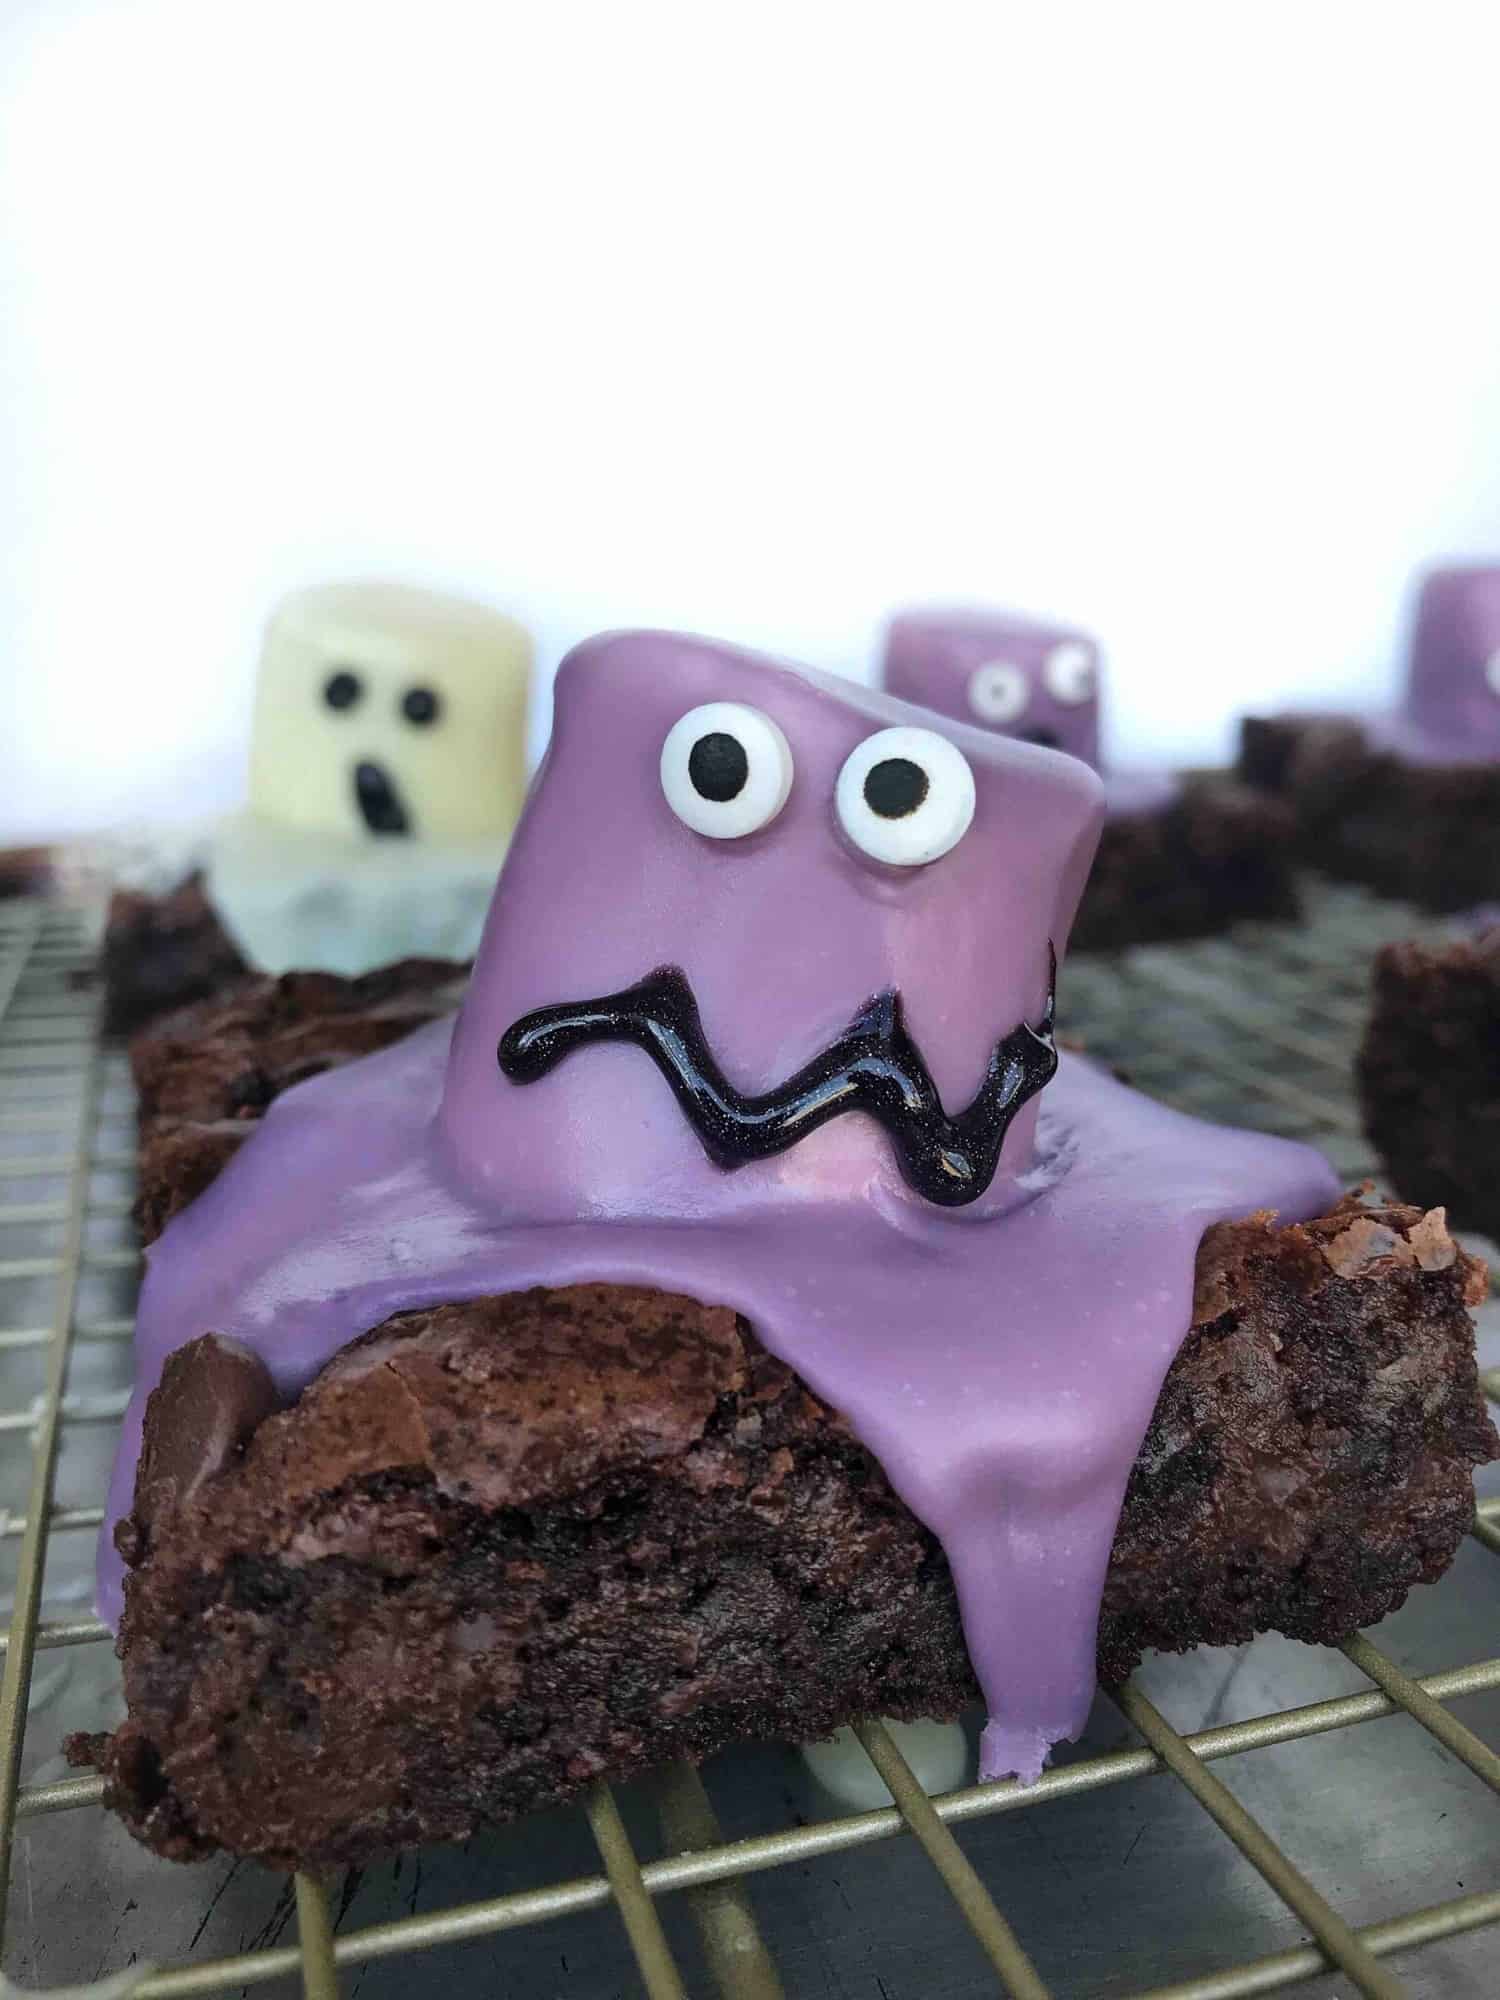 chocolate brownies with decorated marshmallows on top that look like colorful monsters.